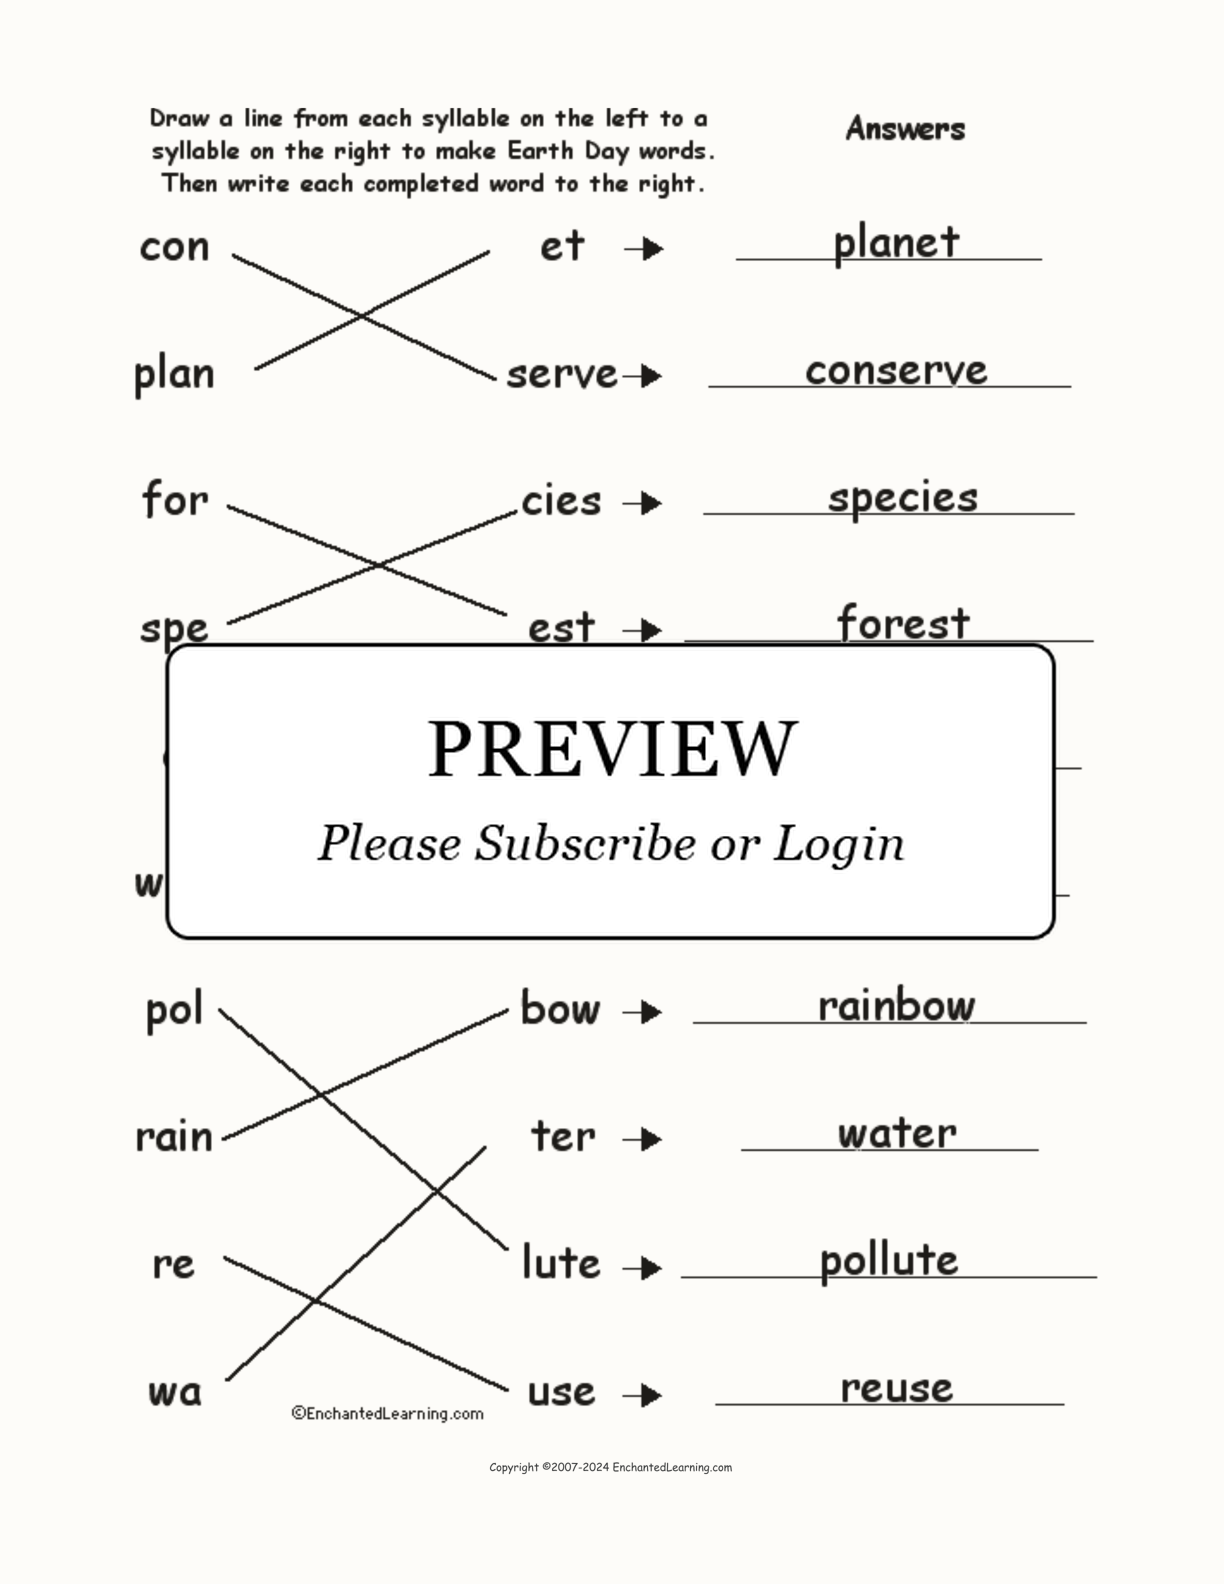 Match the Syllables: Earth Day Words interactive worksheet page 2